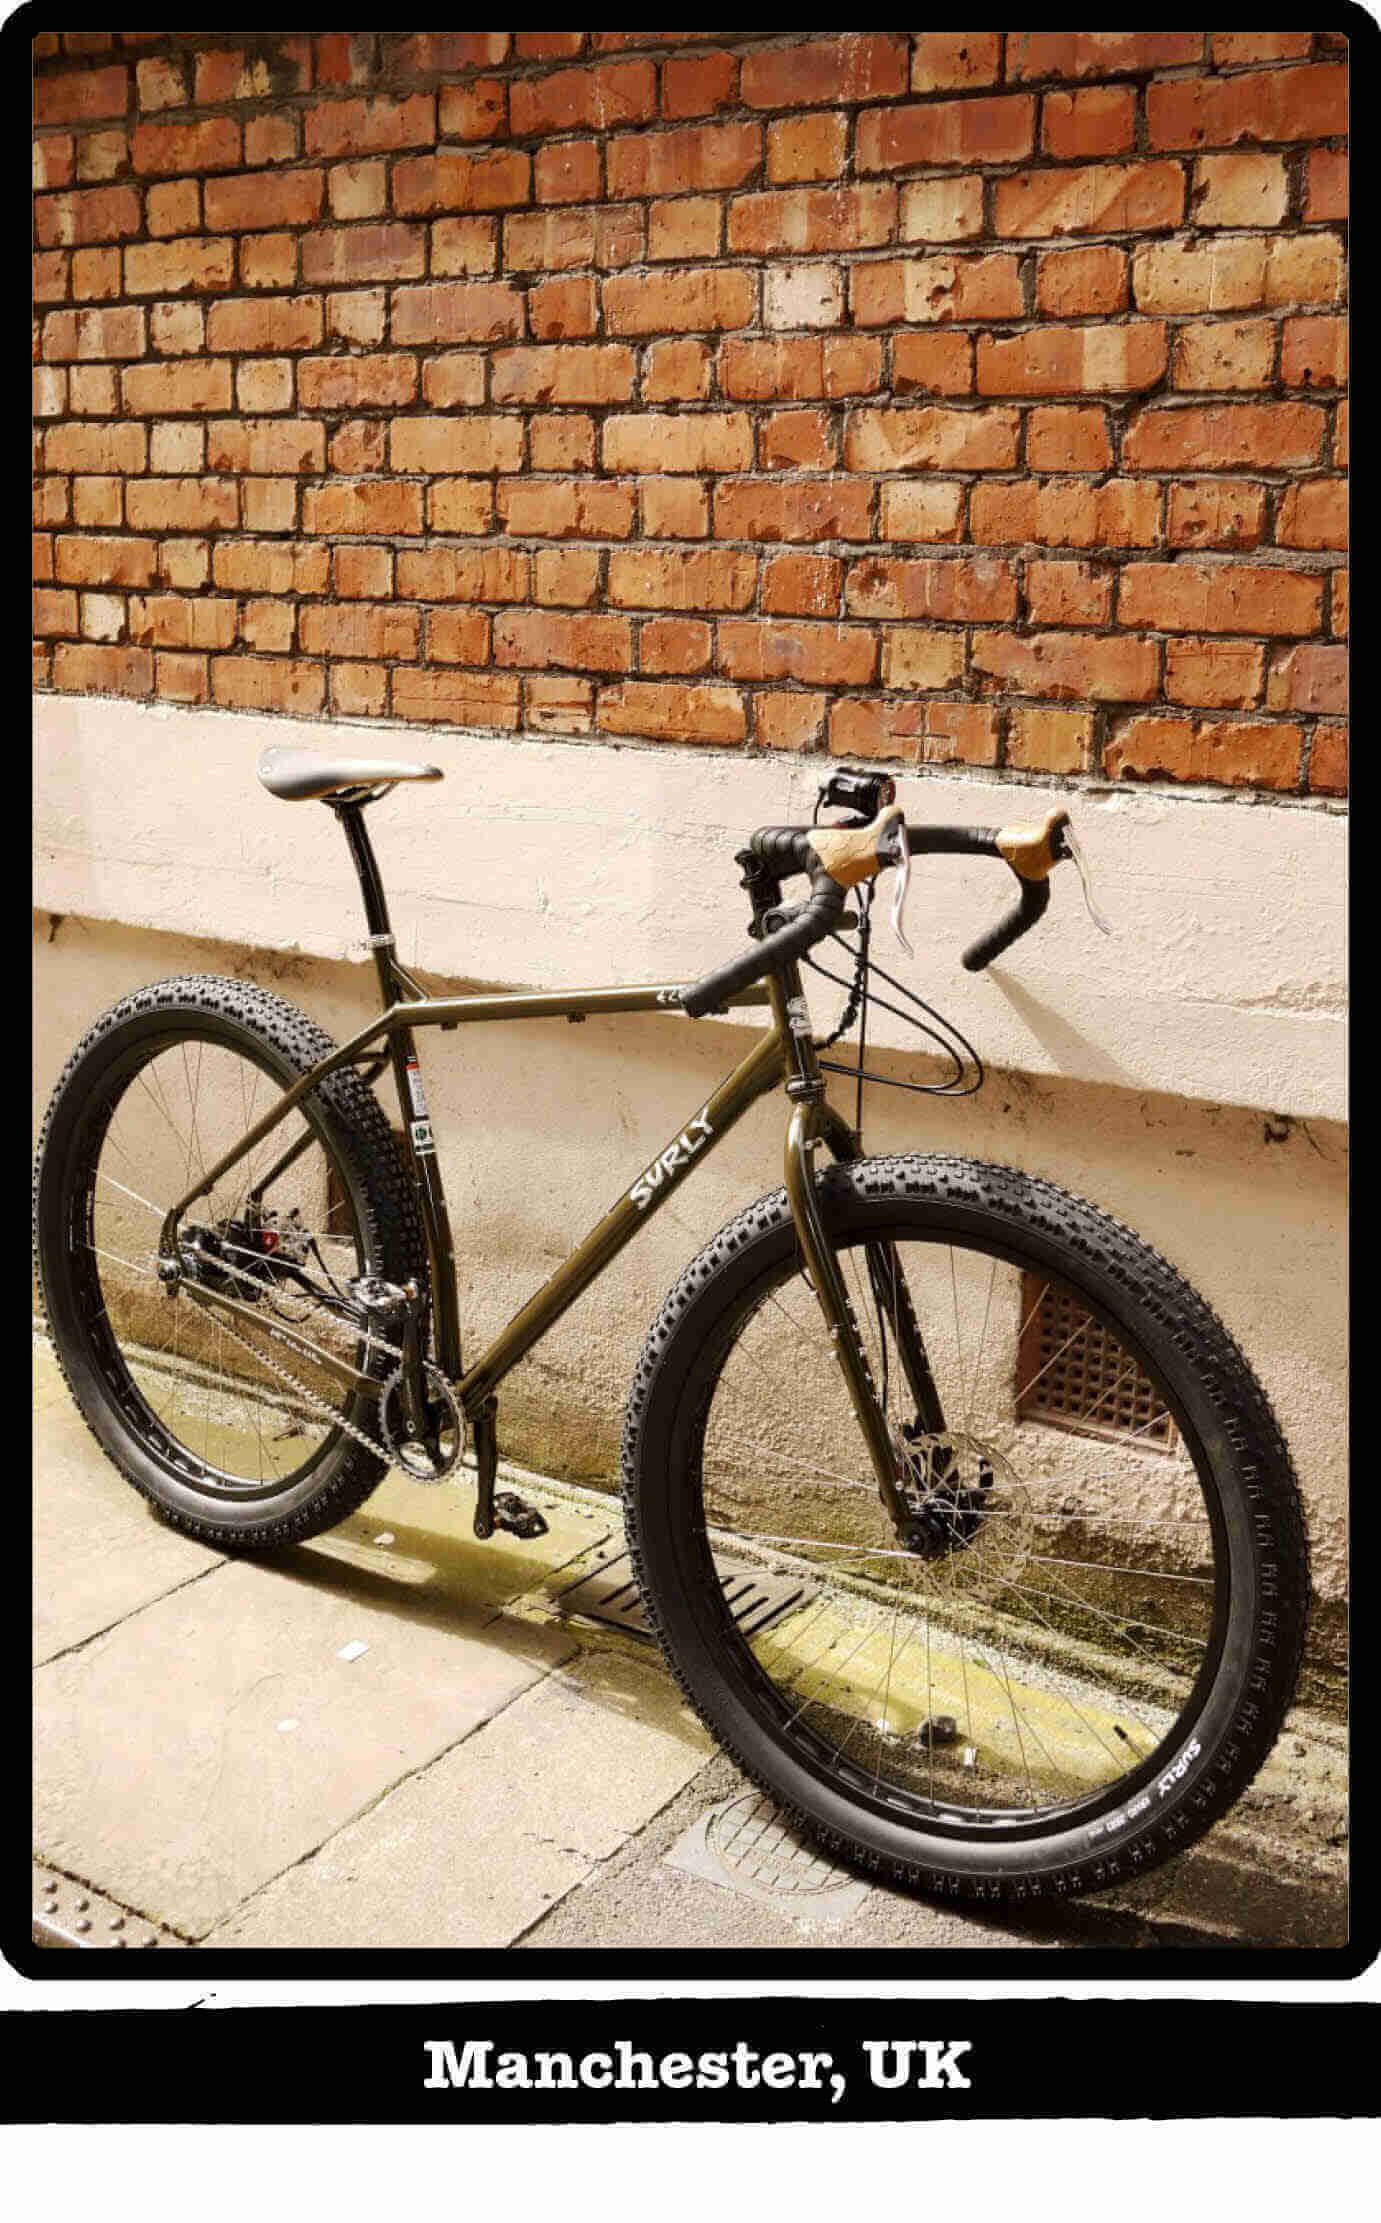 Right side view of a Surly ECR fat bike on sidewalk, leaning against a wall - Manchester, UK tag below image